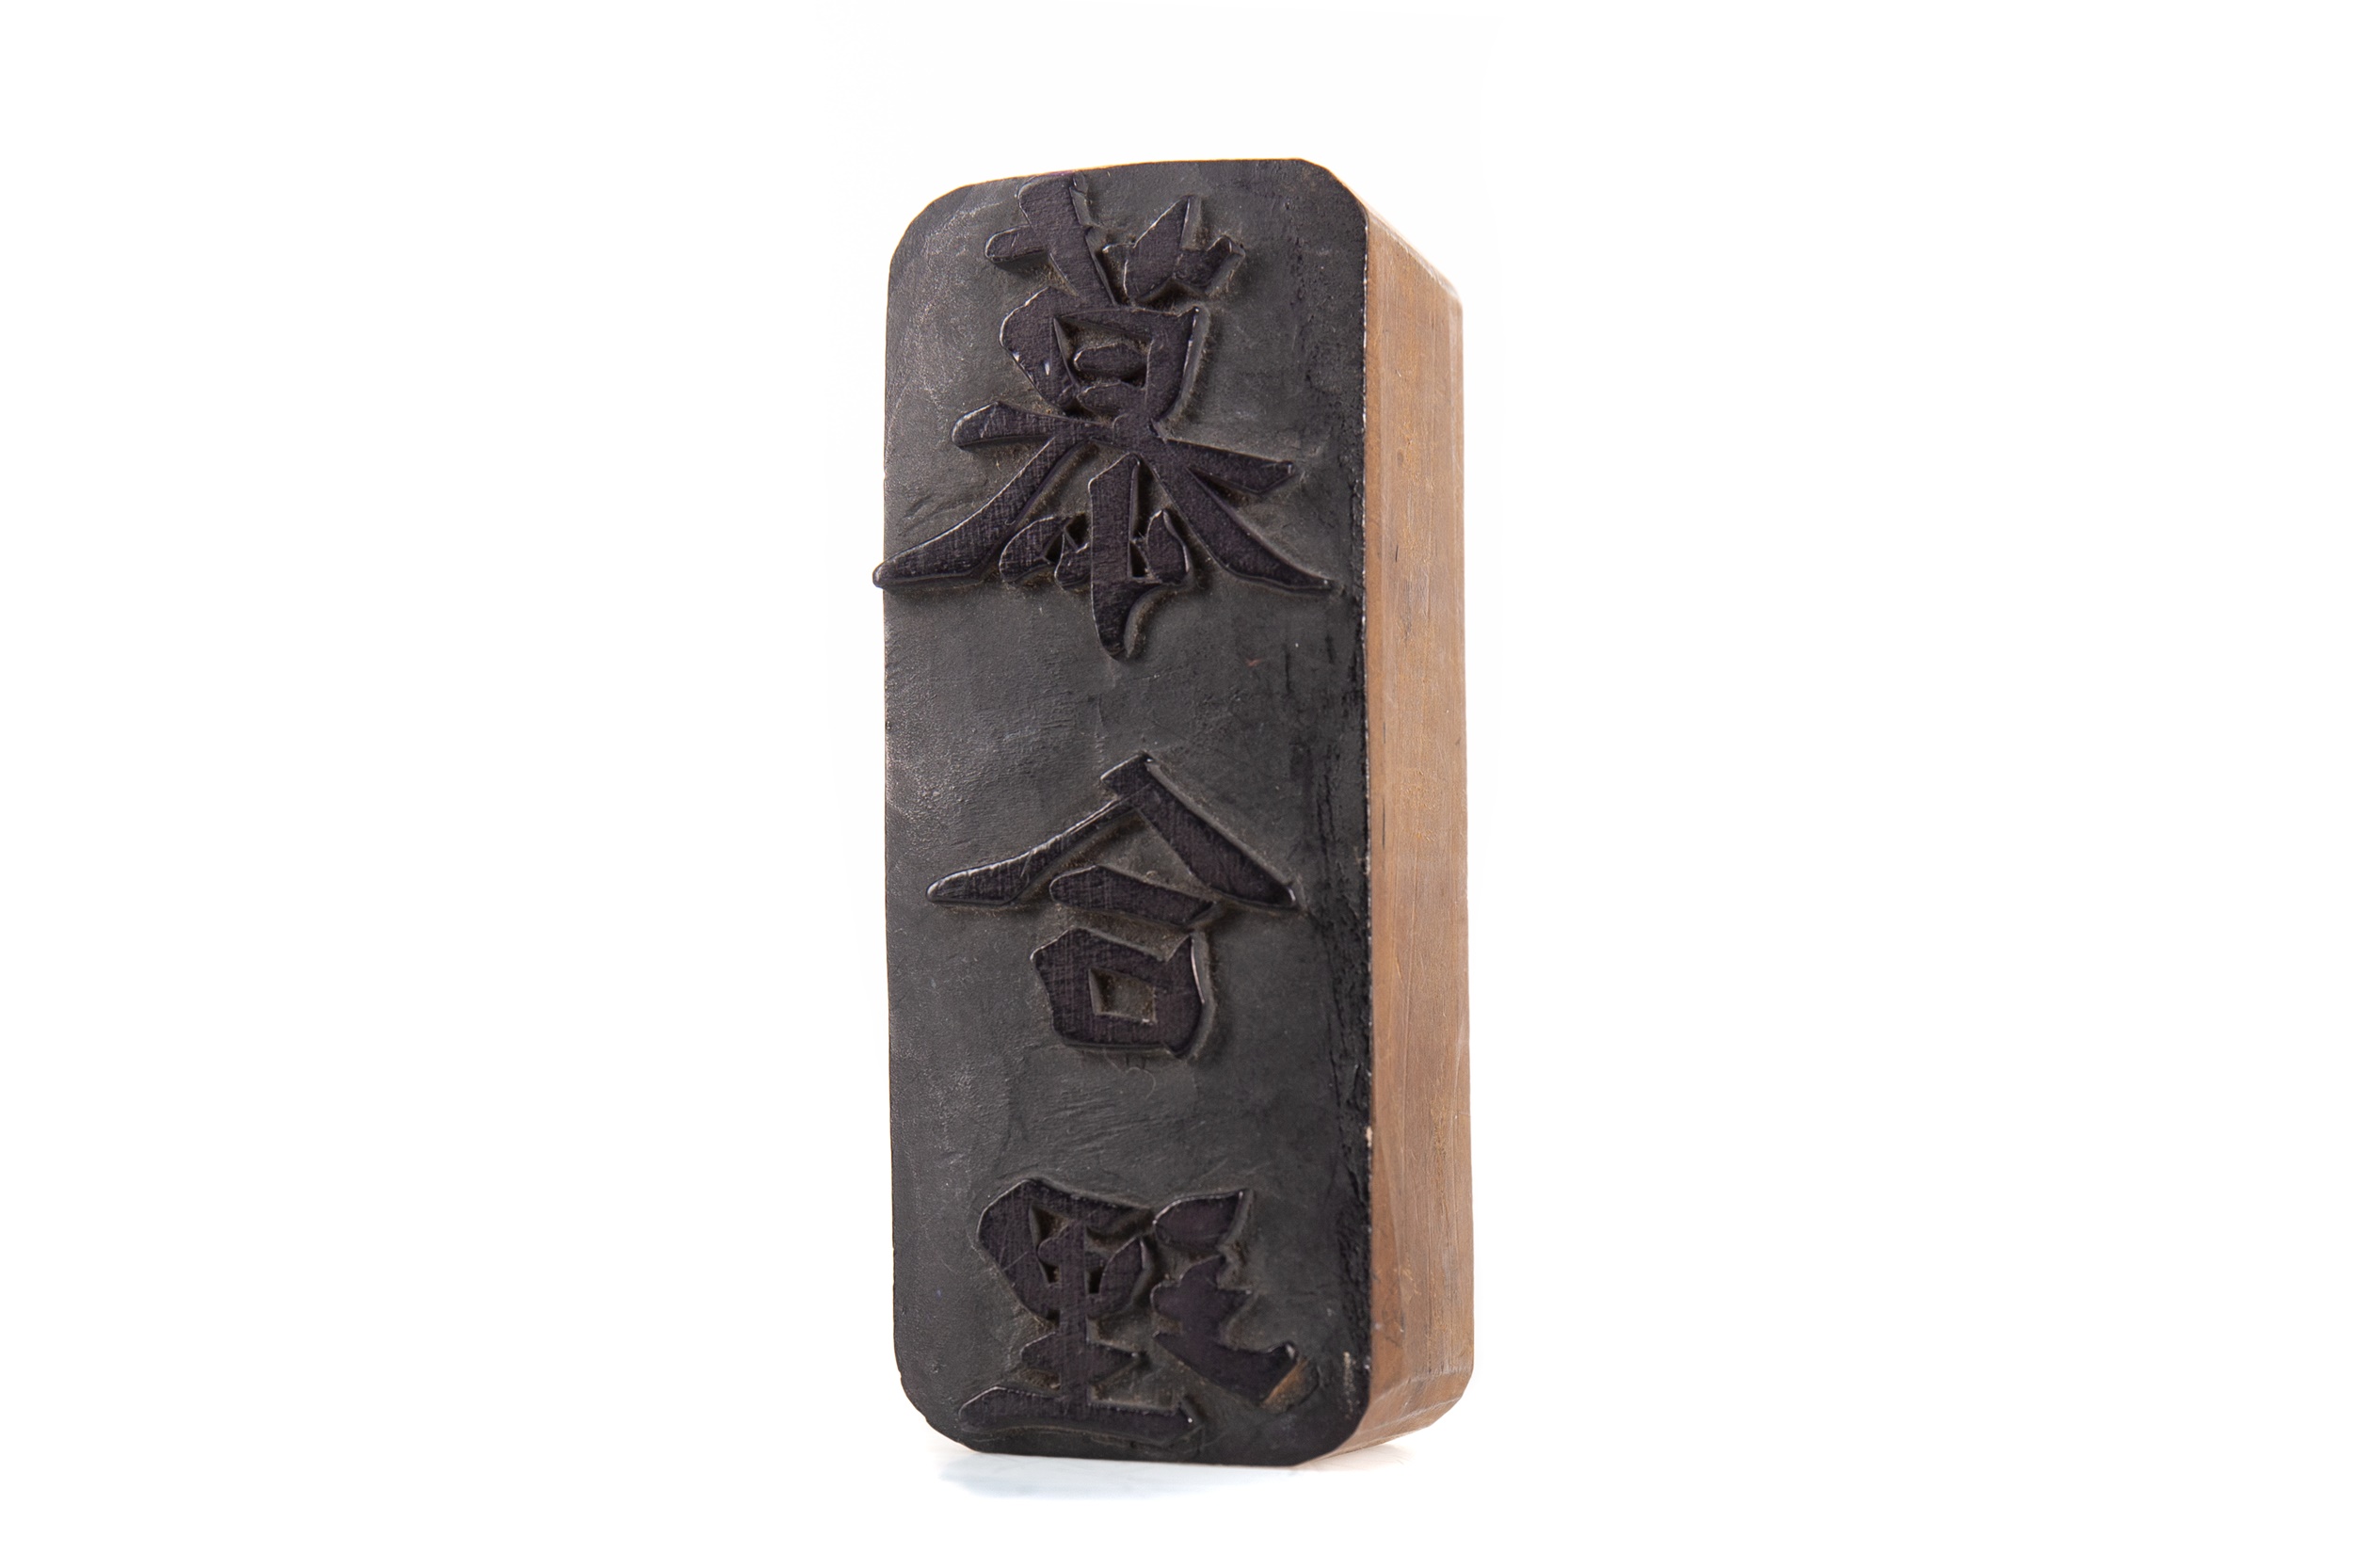 CHINESE CARVED WOOD STAMP/SEAL2 20TH CENTURY